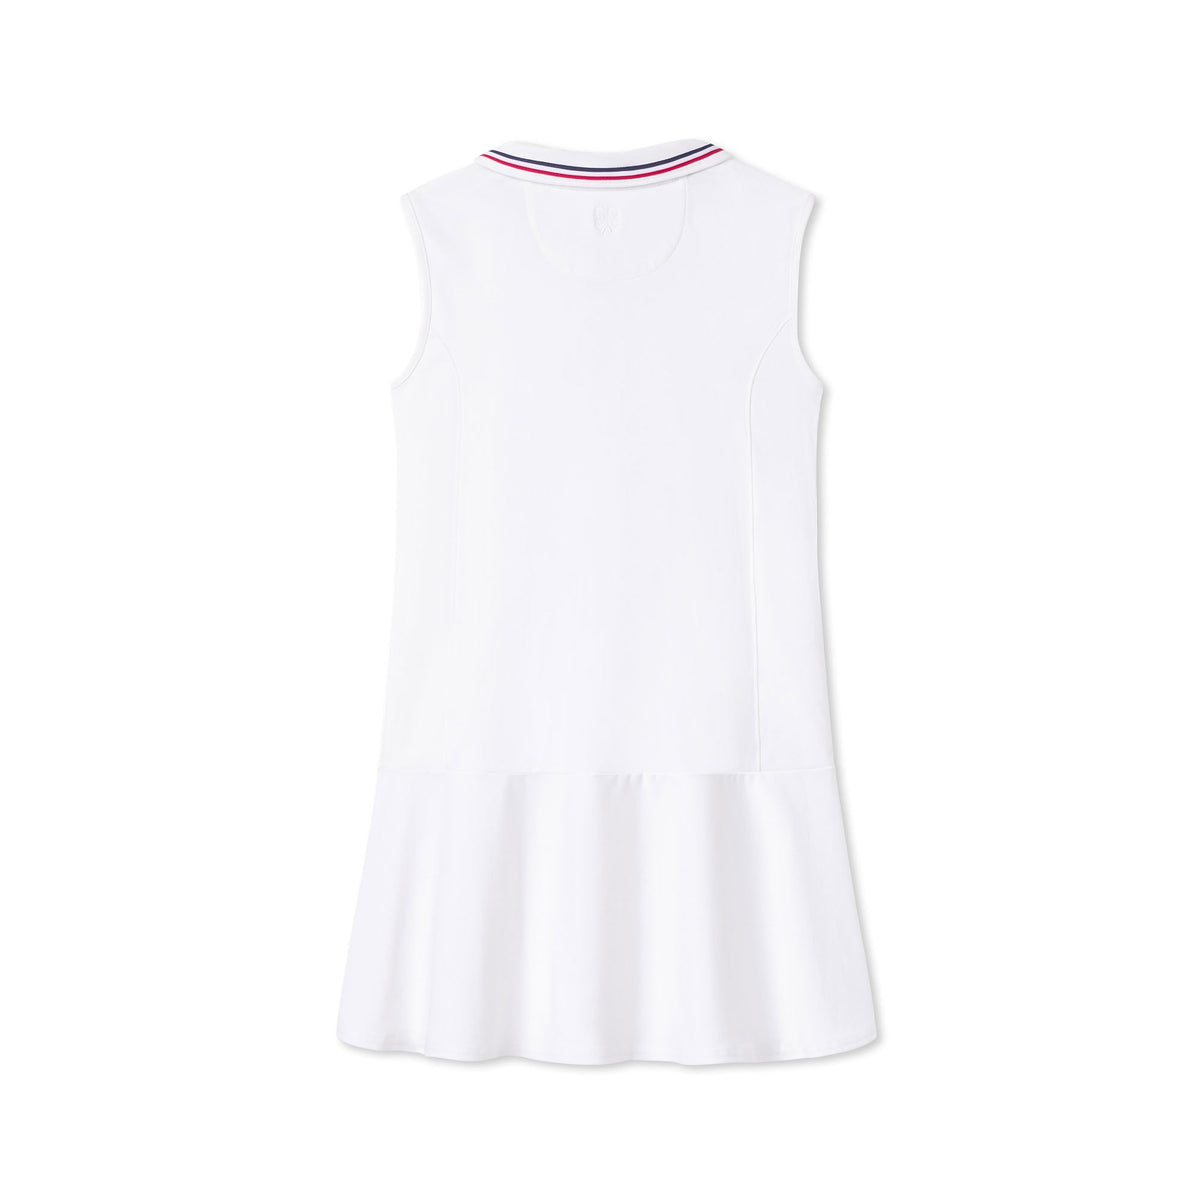 Classic and Preppy Vivian Tennis Performance Americana Dress, Bright White-Dresses, Jumpsuits and Rompers-CPC - Classic Prep Childrenswear